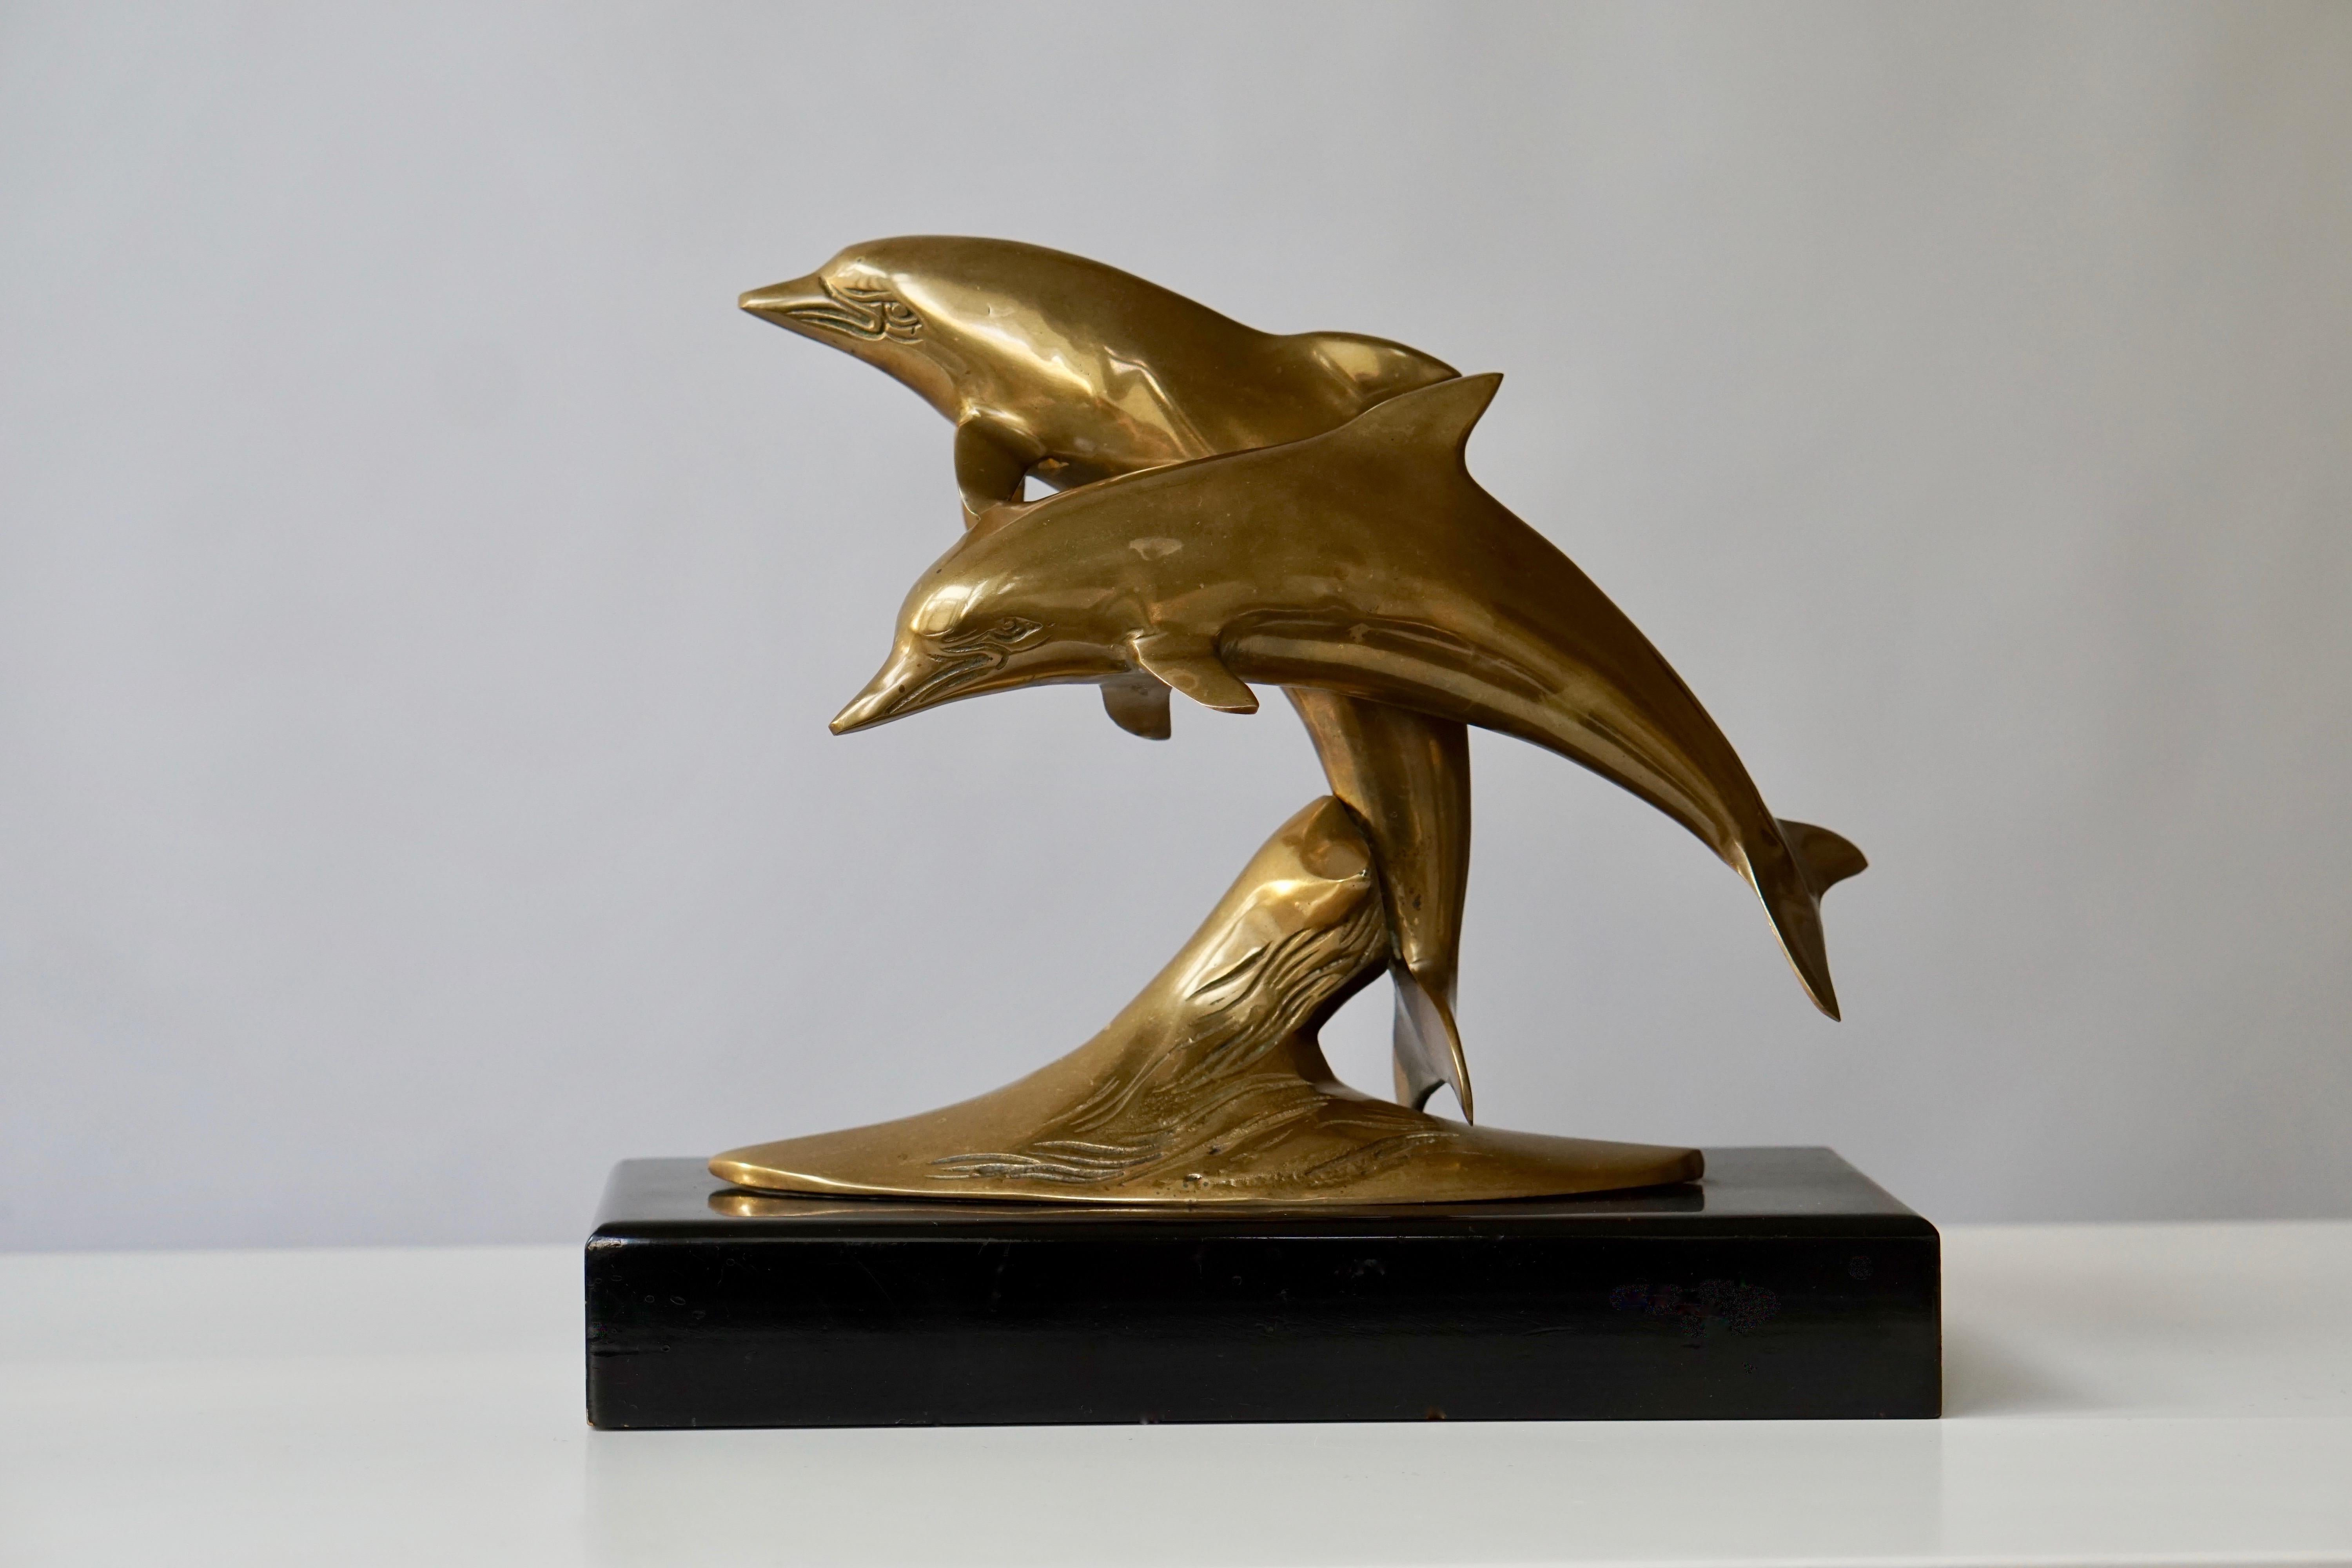 Brass sculpture of dolphins on a wooden base.
Measures: Height 24 cm.
Width 27 cm.
Depth 11 cm.